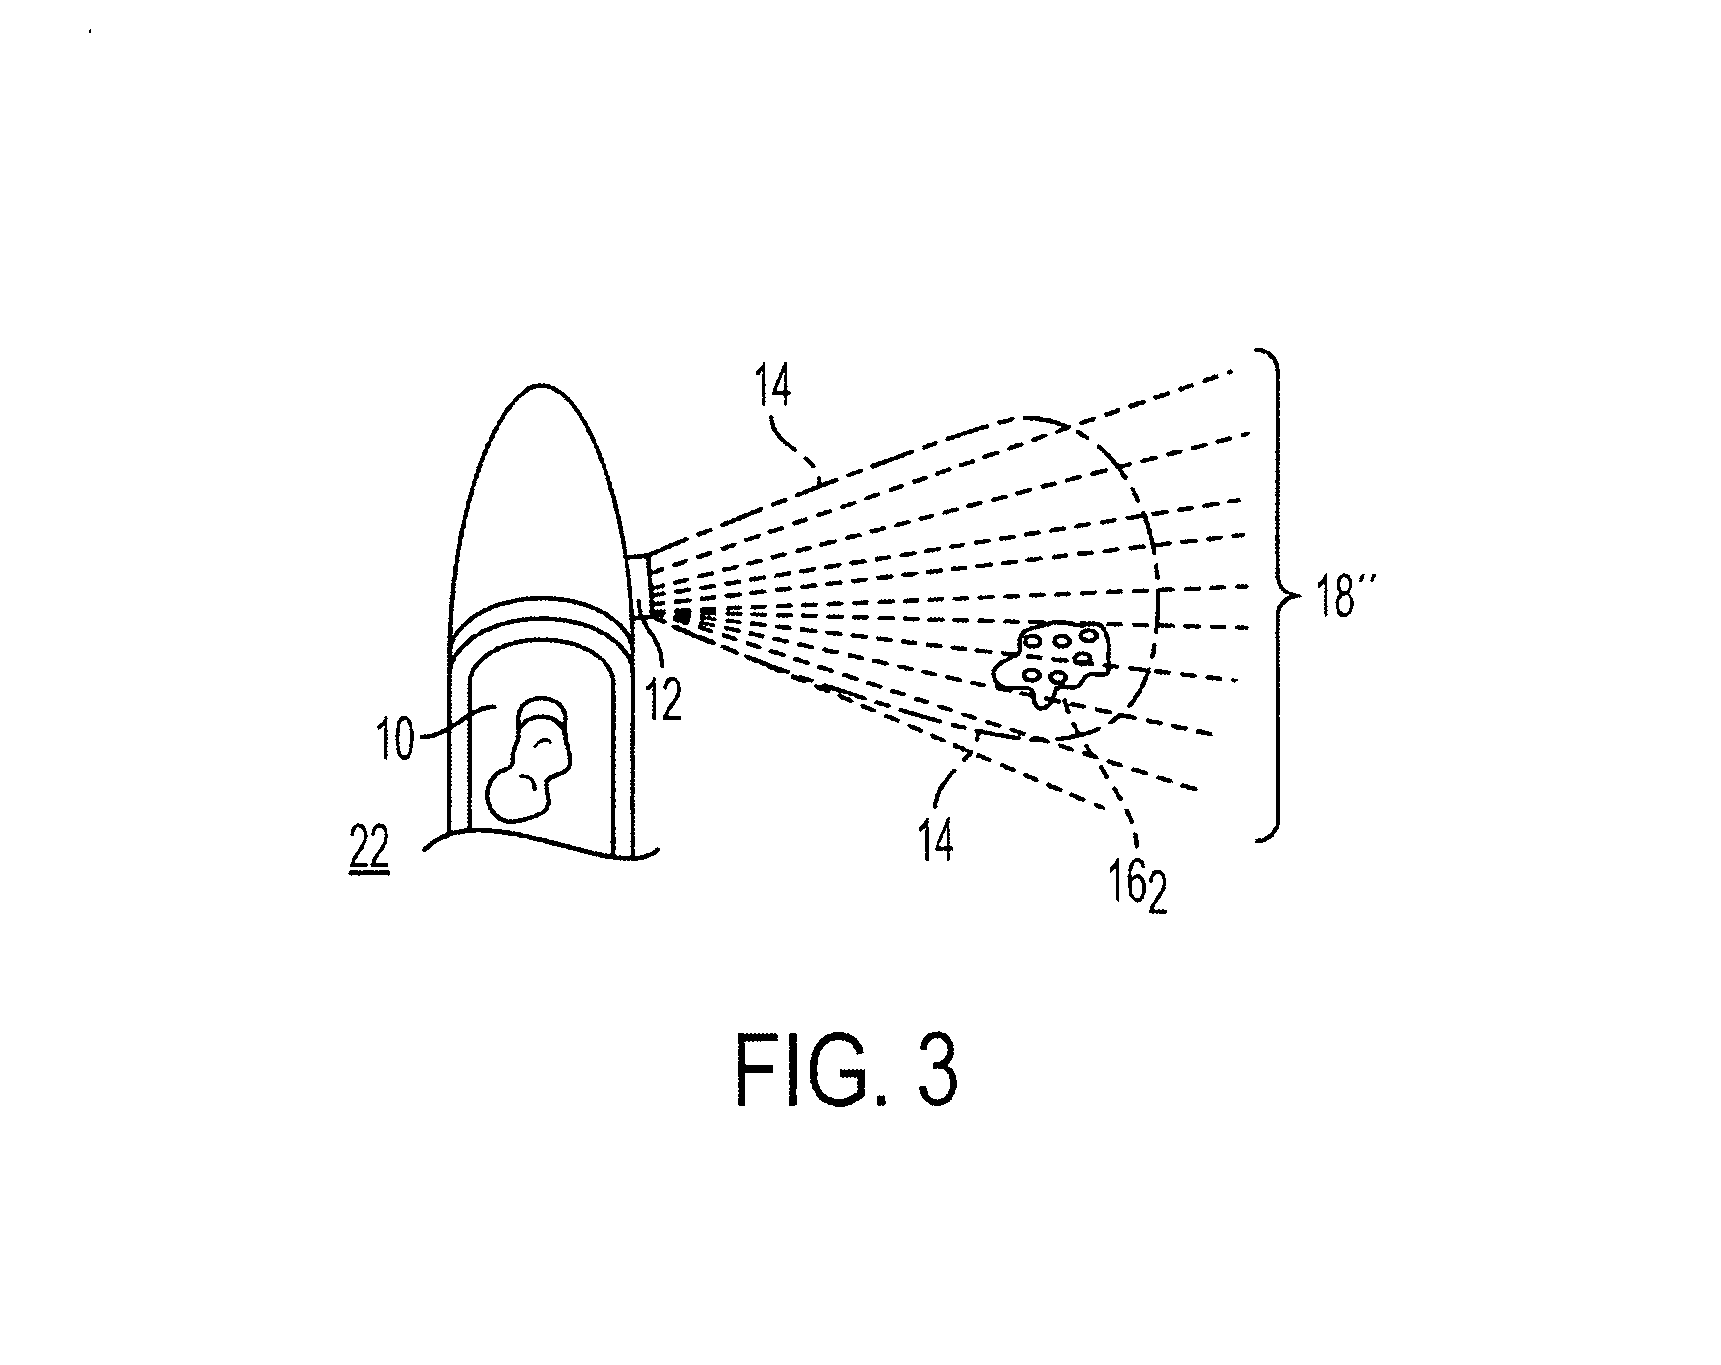 Apparatus and method for compensating images for differences in aspect